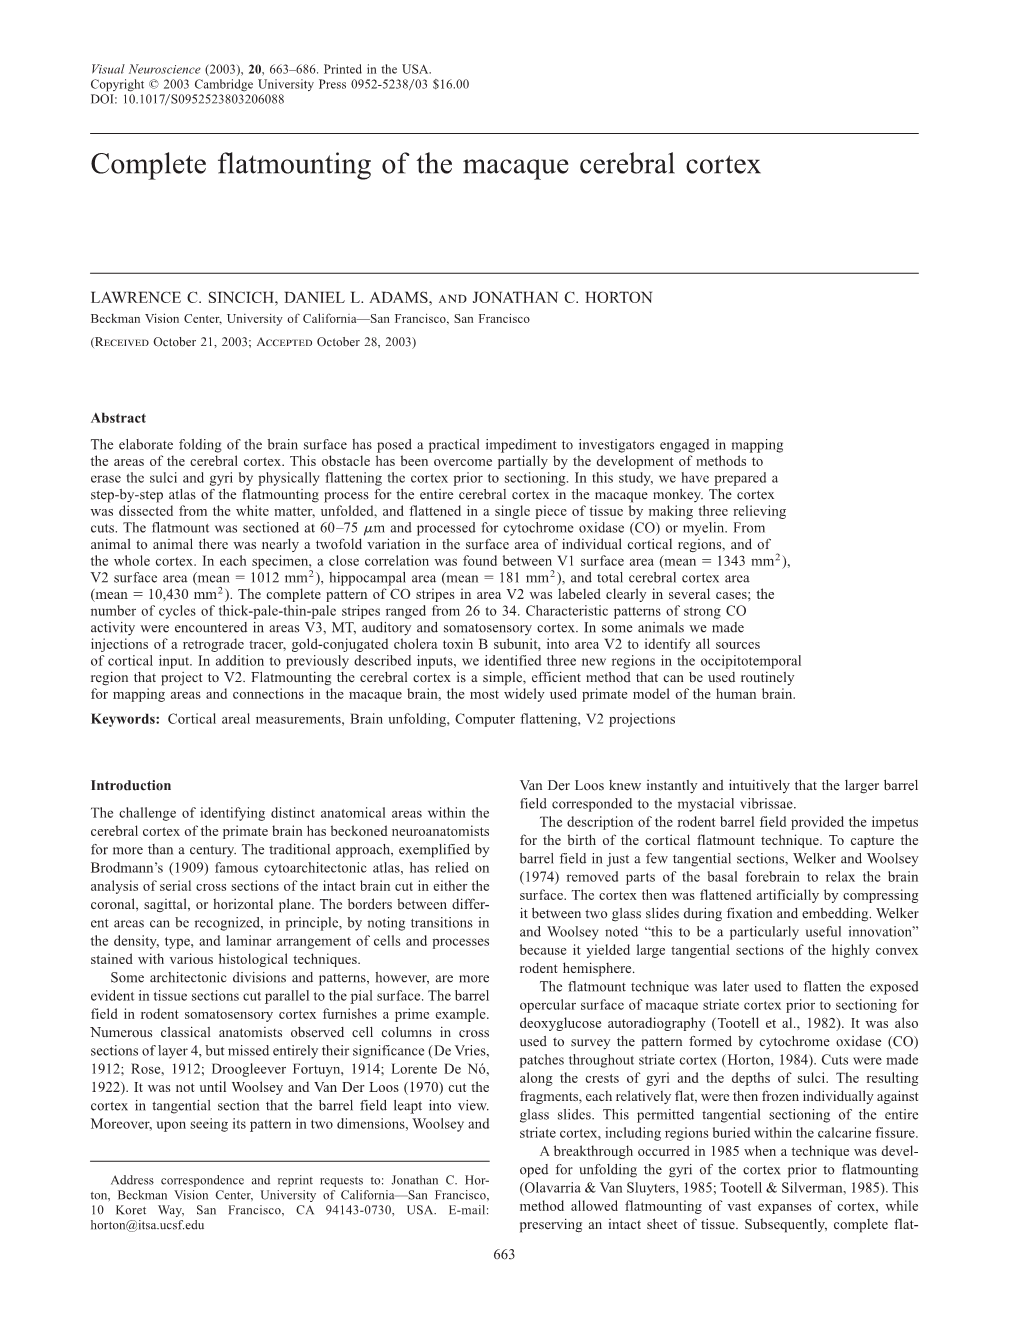 Complete Flatmounting of the Macaque Cerebral Cortex